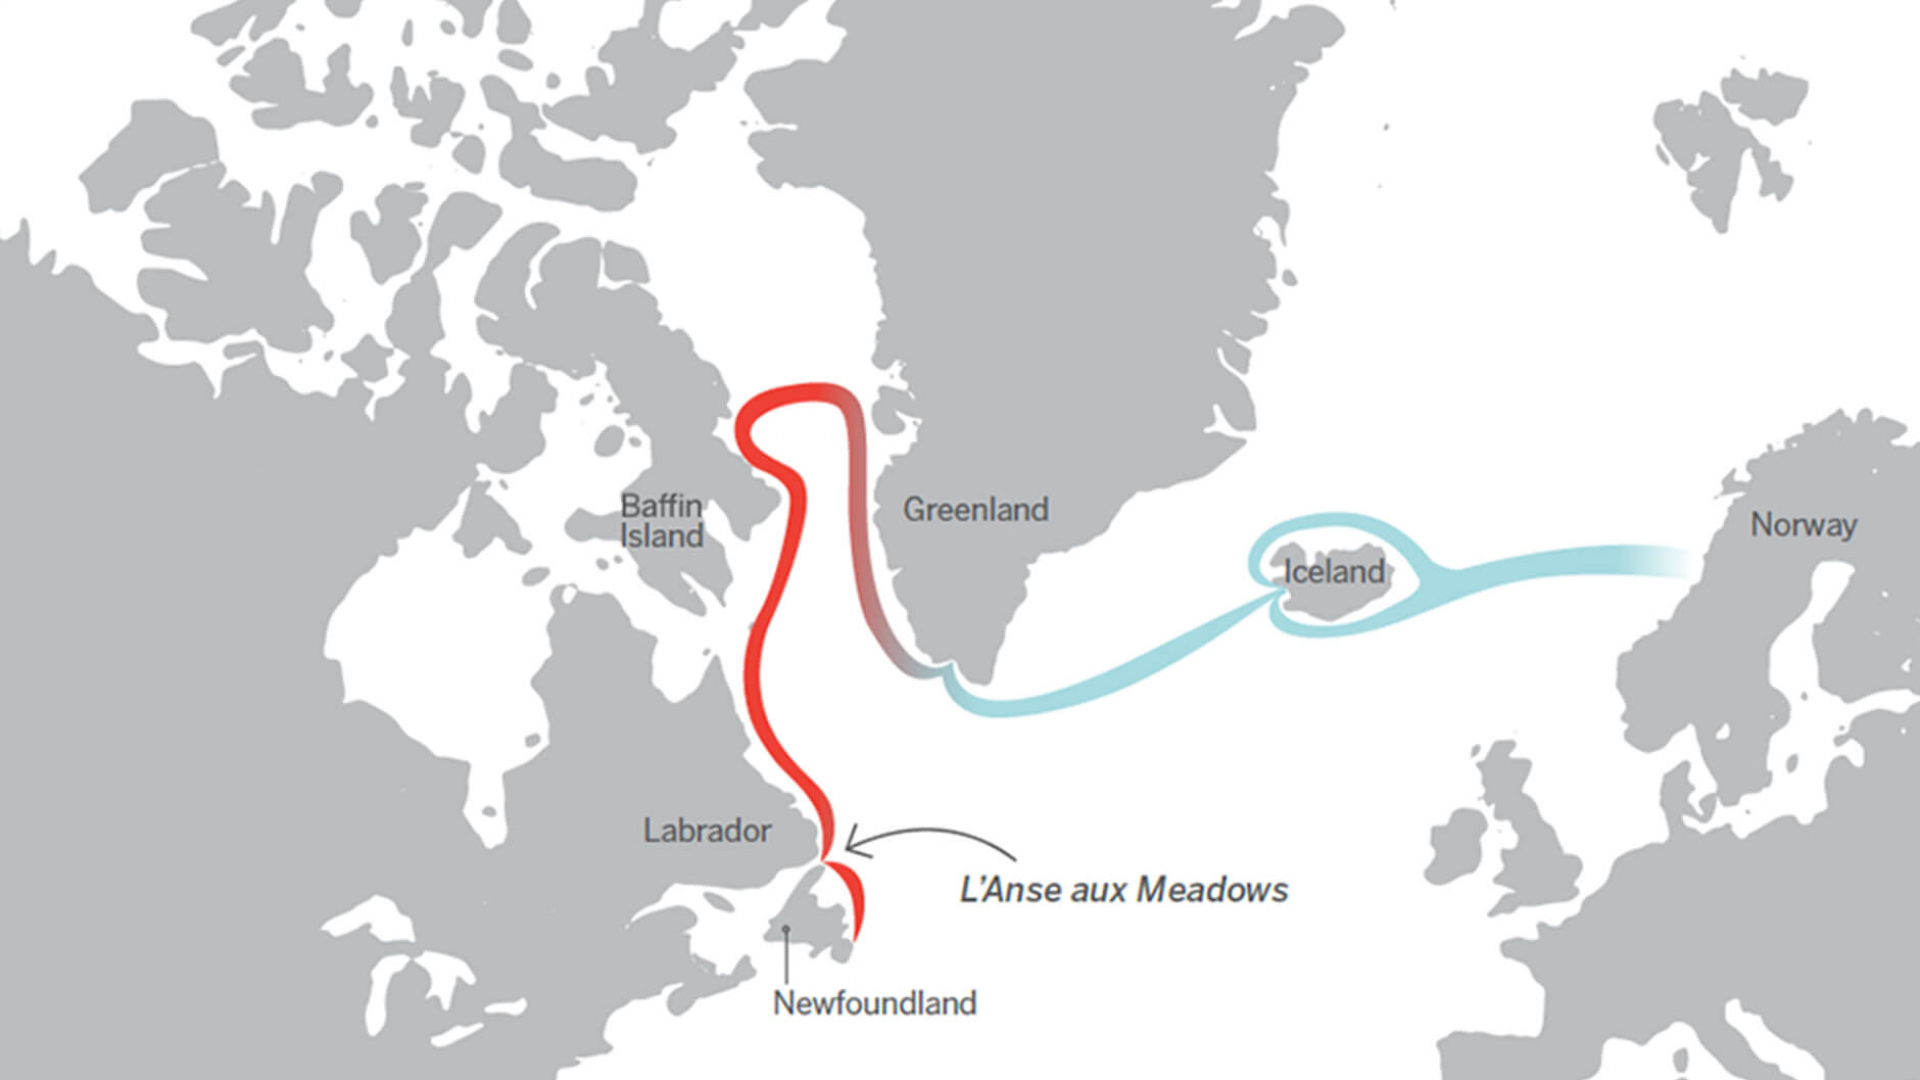 Map of Norse route from Norway to Newfoundland.